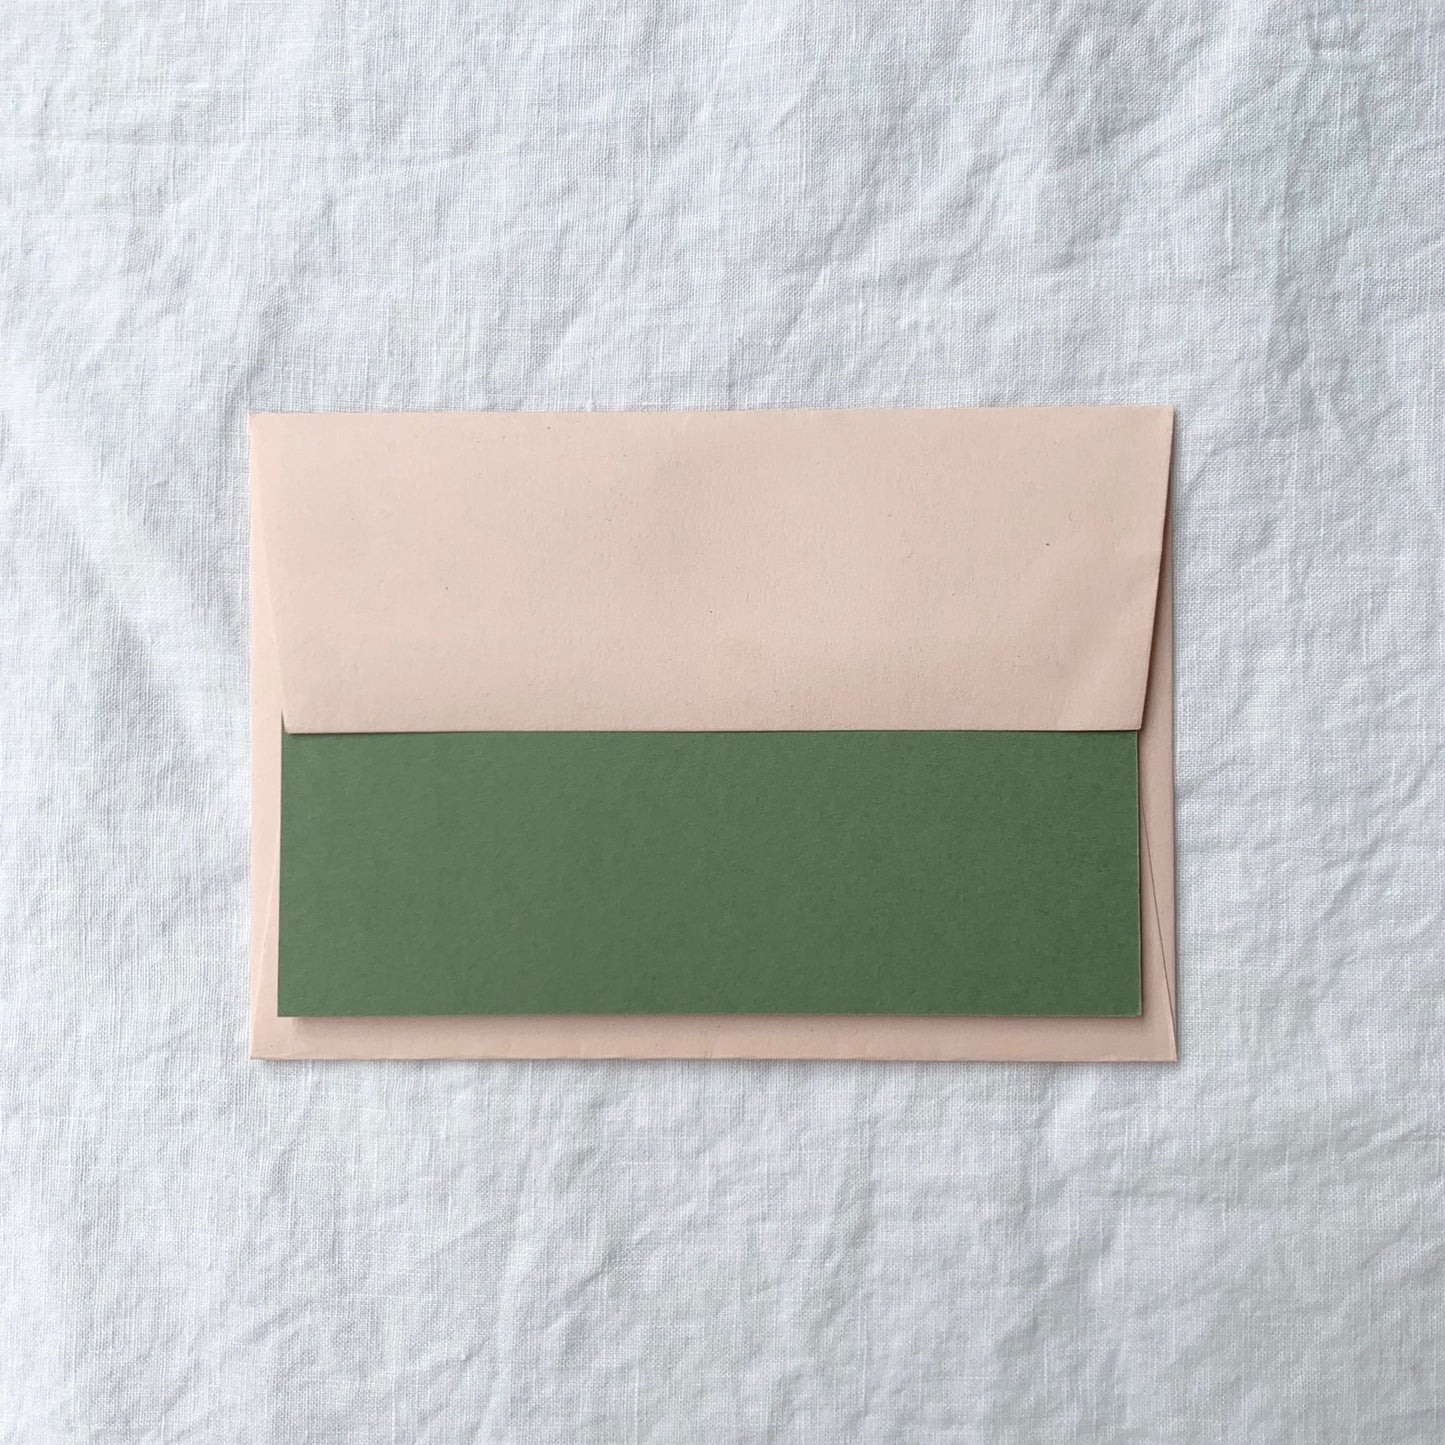 Personalised Note Cards in Olive